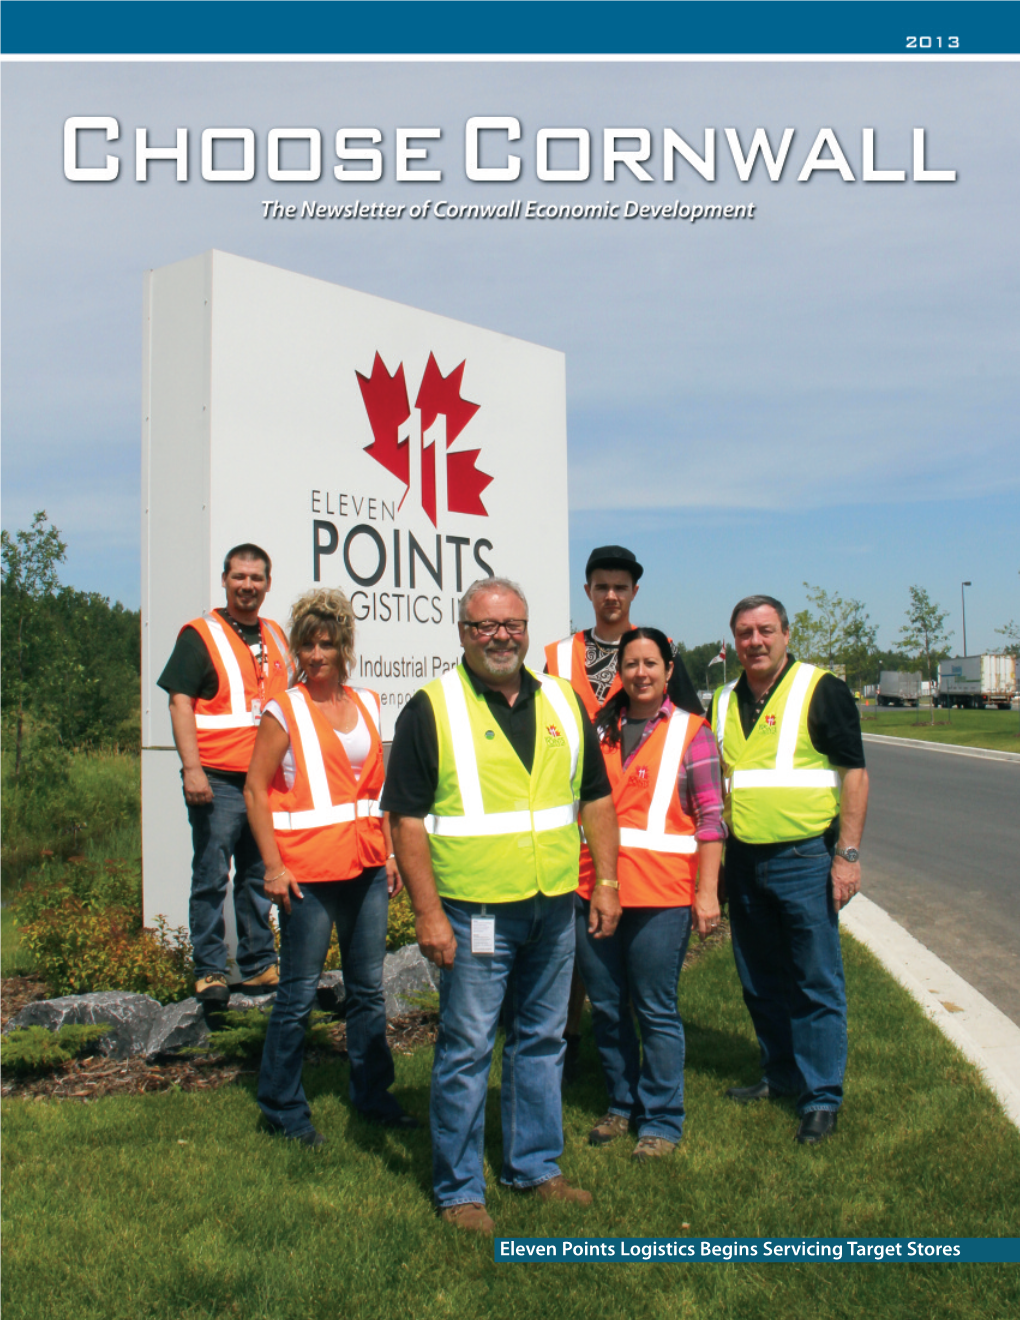 Eleven Points Logistics Begins Servicing Target Stores Cornwall's Economy Offers Opportunities 2012 Was a Great Year, and 2013 Is Continuing That Positive Trend